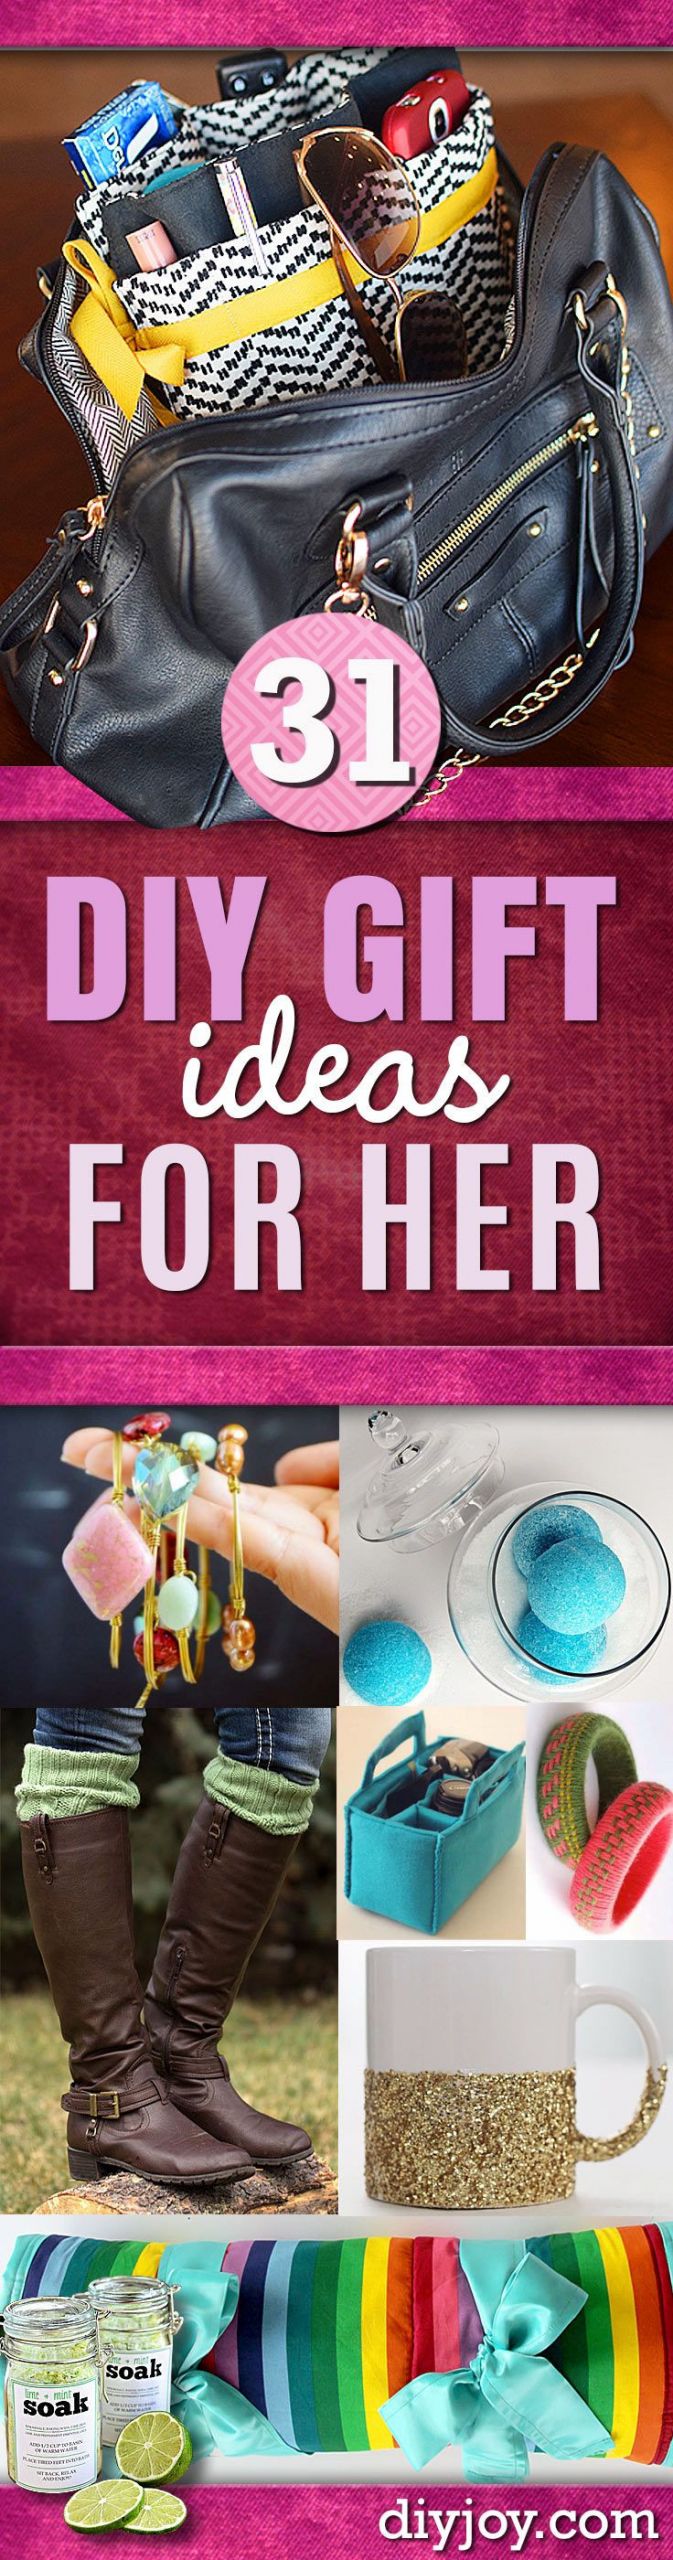 Gift Ideas For Girlfriends Mom
 Super Special DIY Gift Ideas for Her DIY JOY